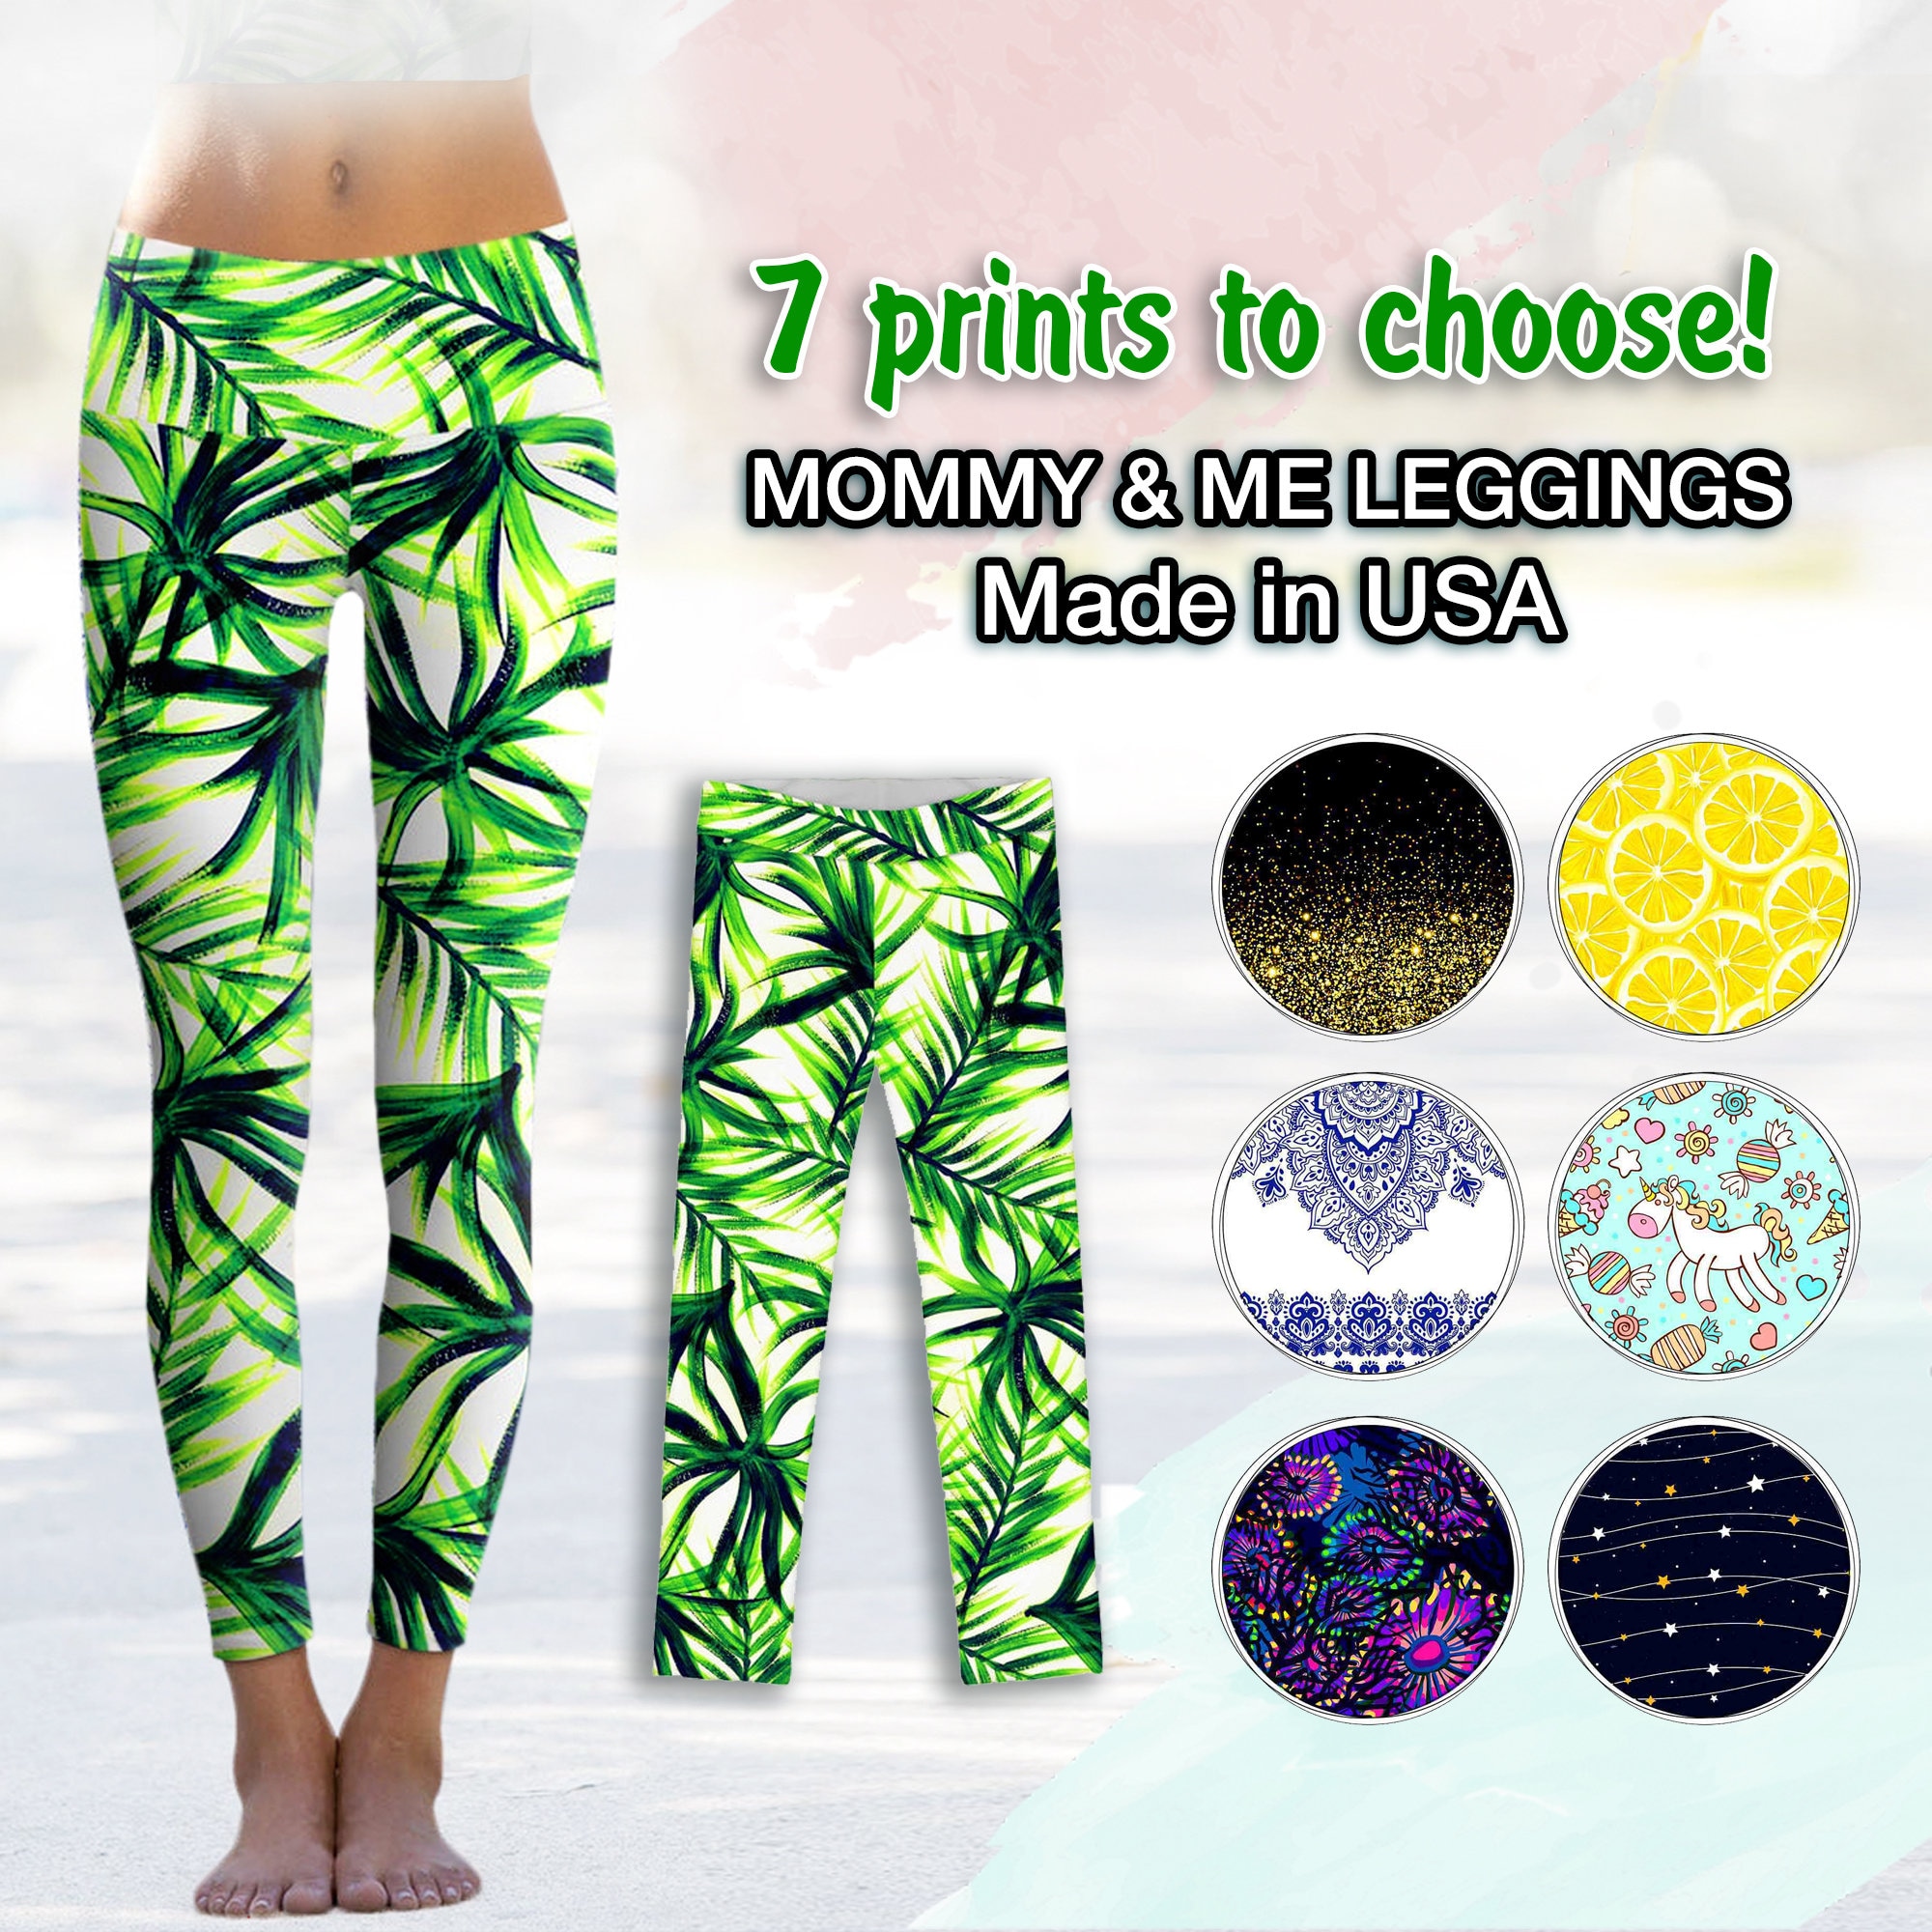 Camo Leggings for Women Summer, Pink Camo Pants, Mothers Day Gift